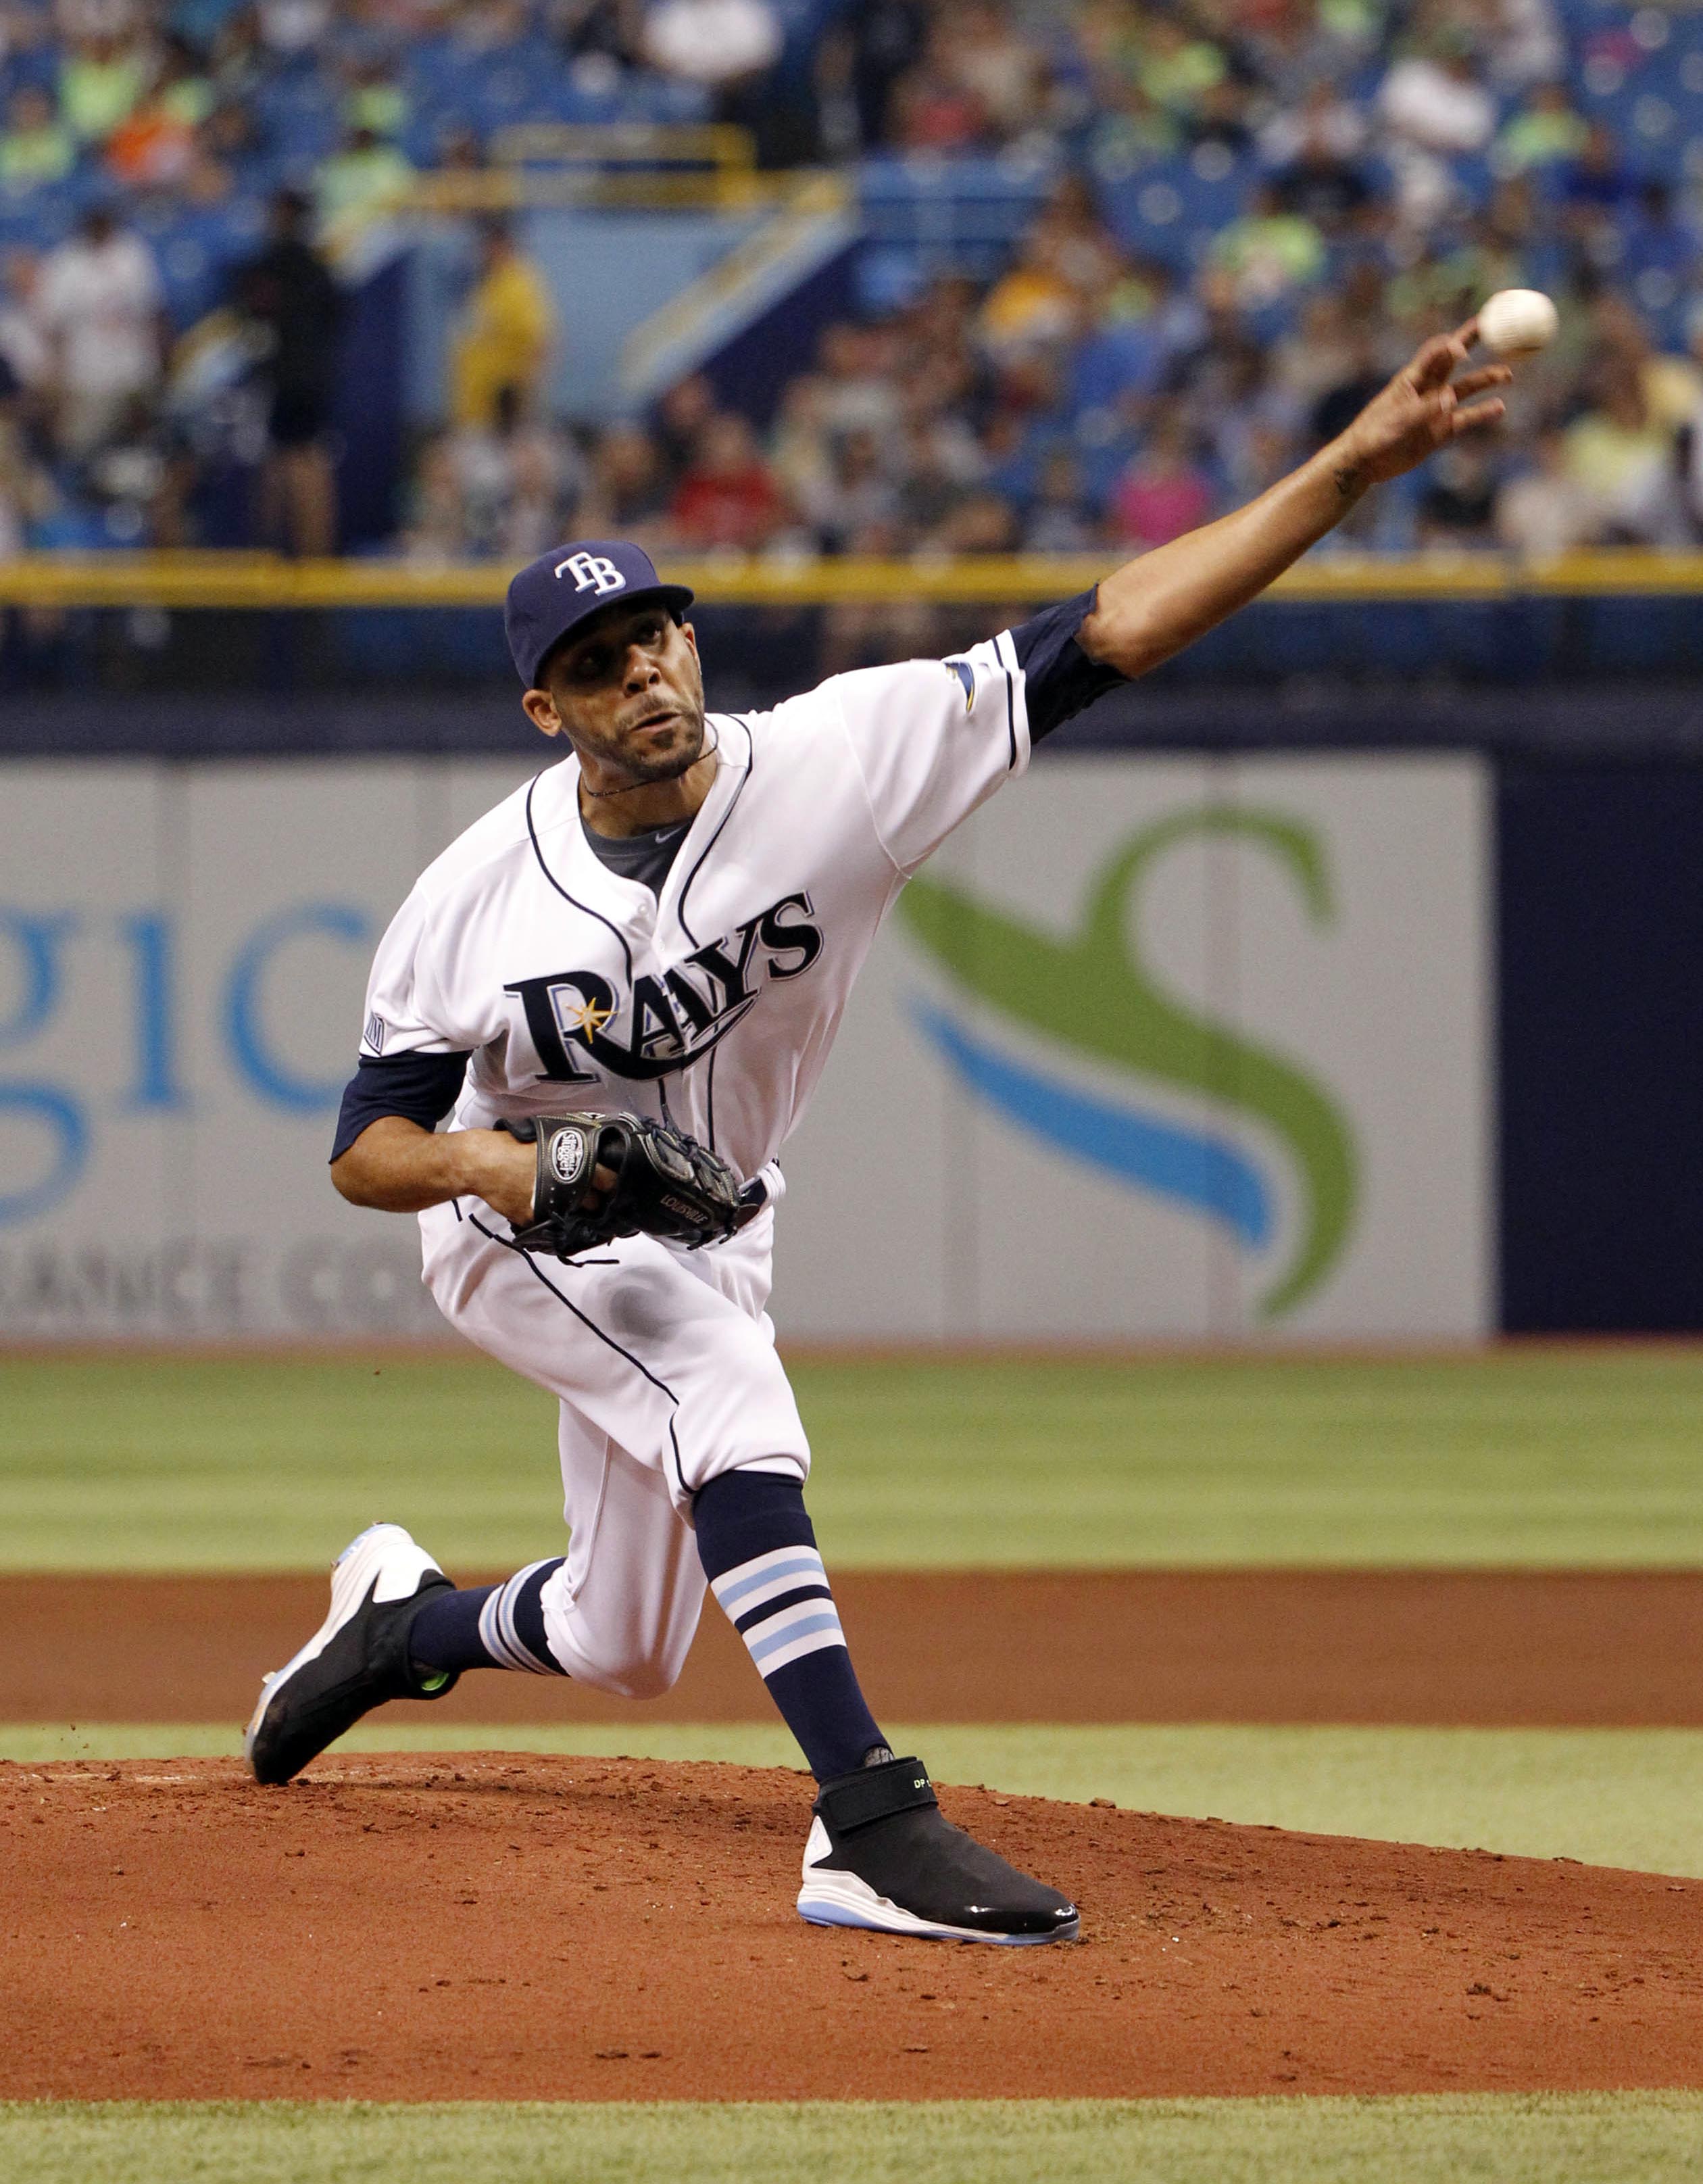 The Rays' David Price Trade Is Finally Paying Dividends - MLB